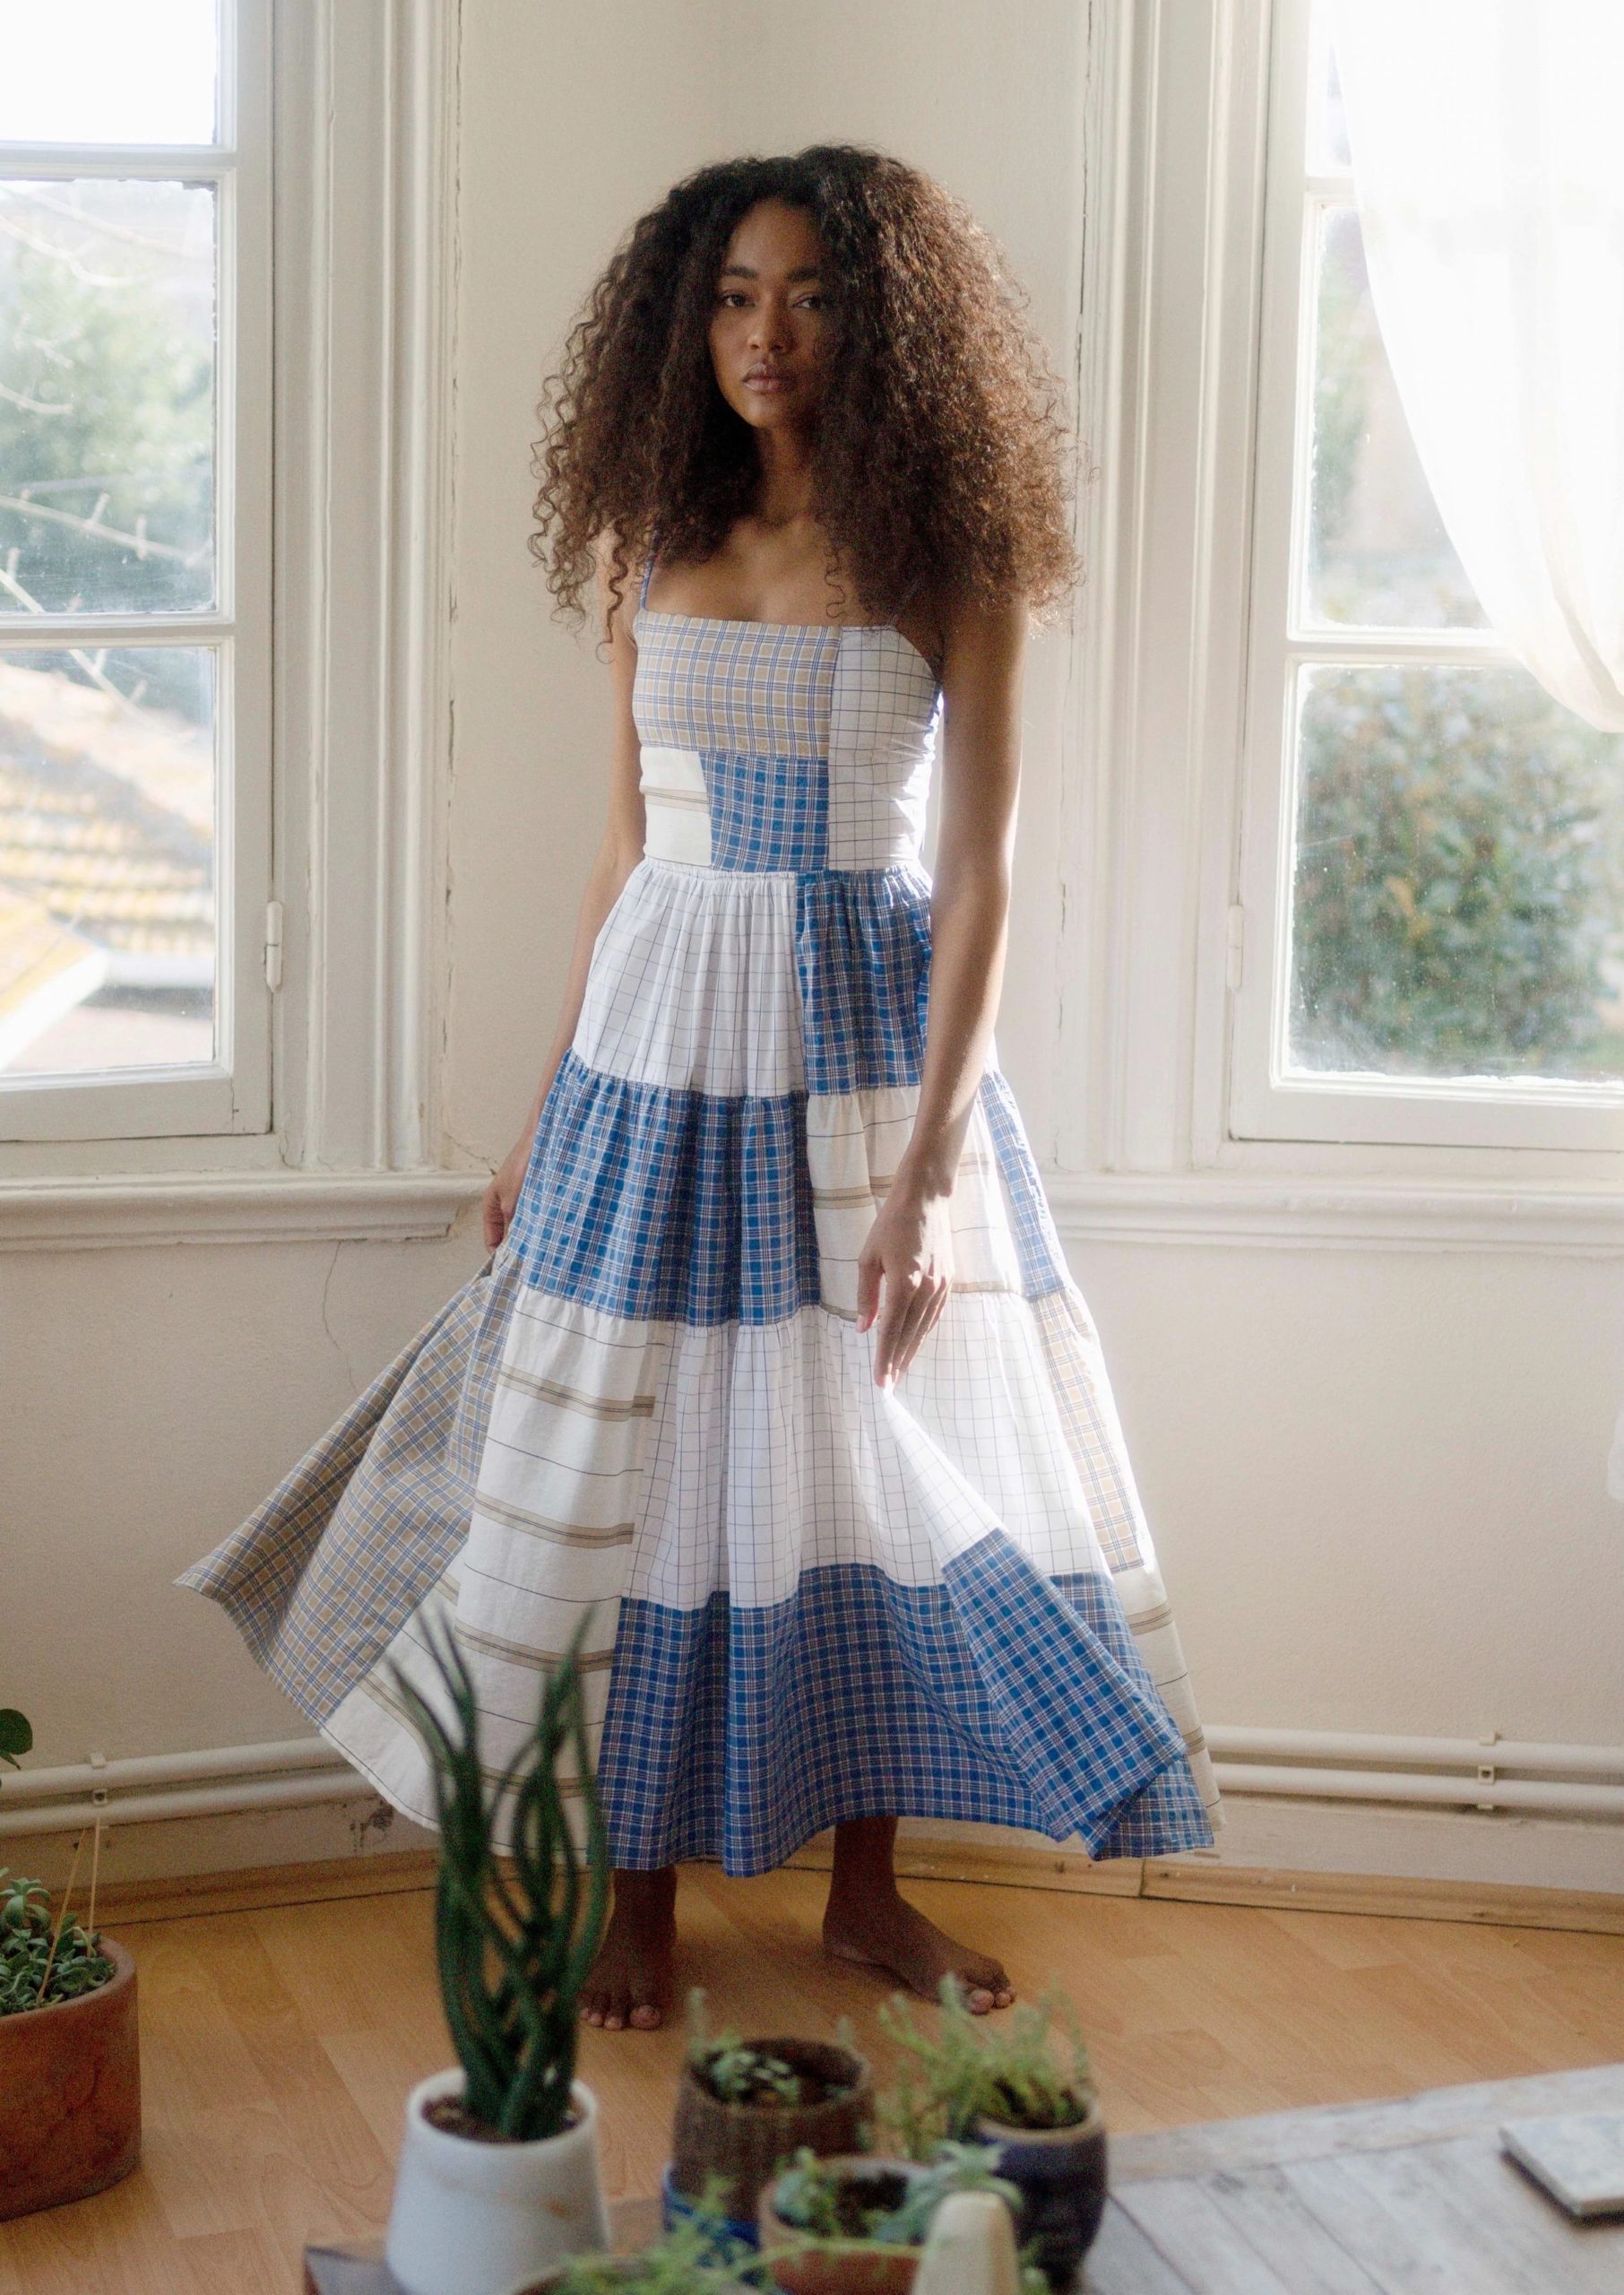 Young girl with curly hair wearing zero waste fashion cloth